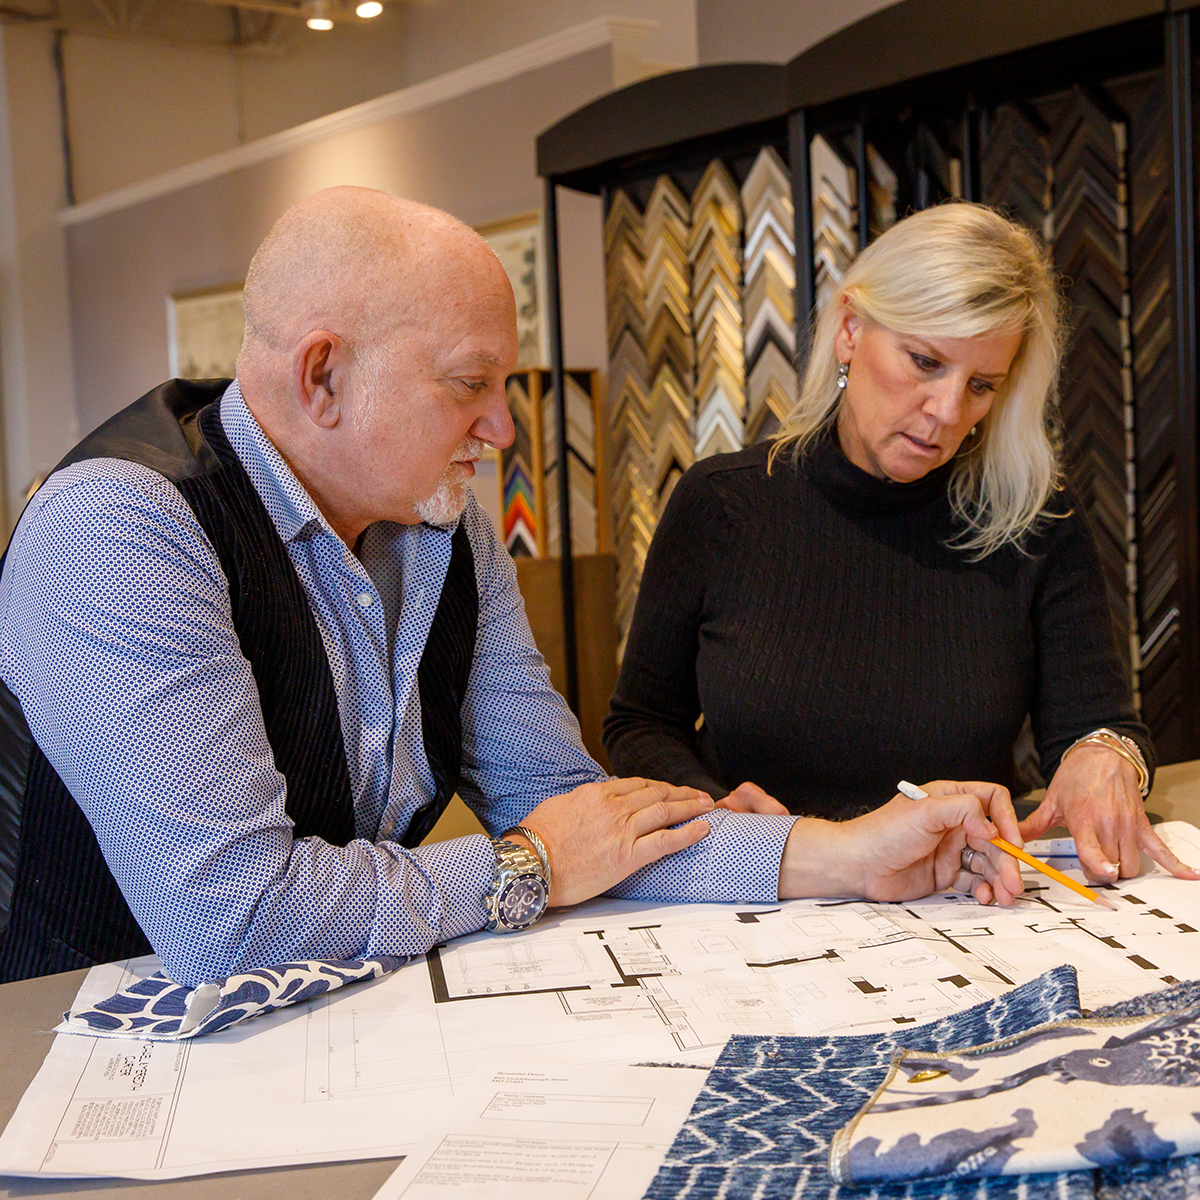 Jamie Merida and lead interior designer Denise Perkins looking at a floor plan and working on a client project